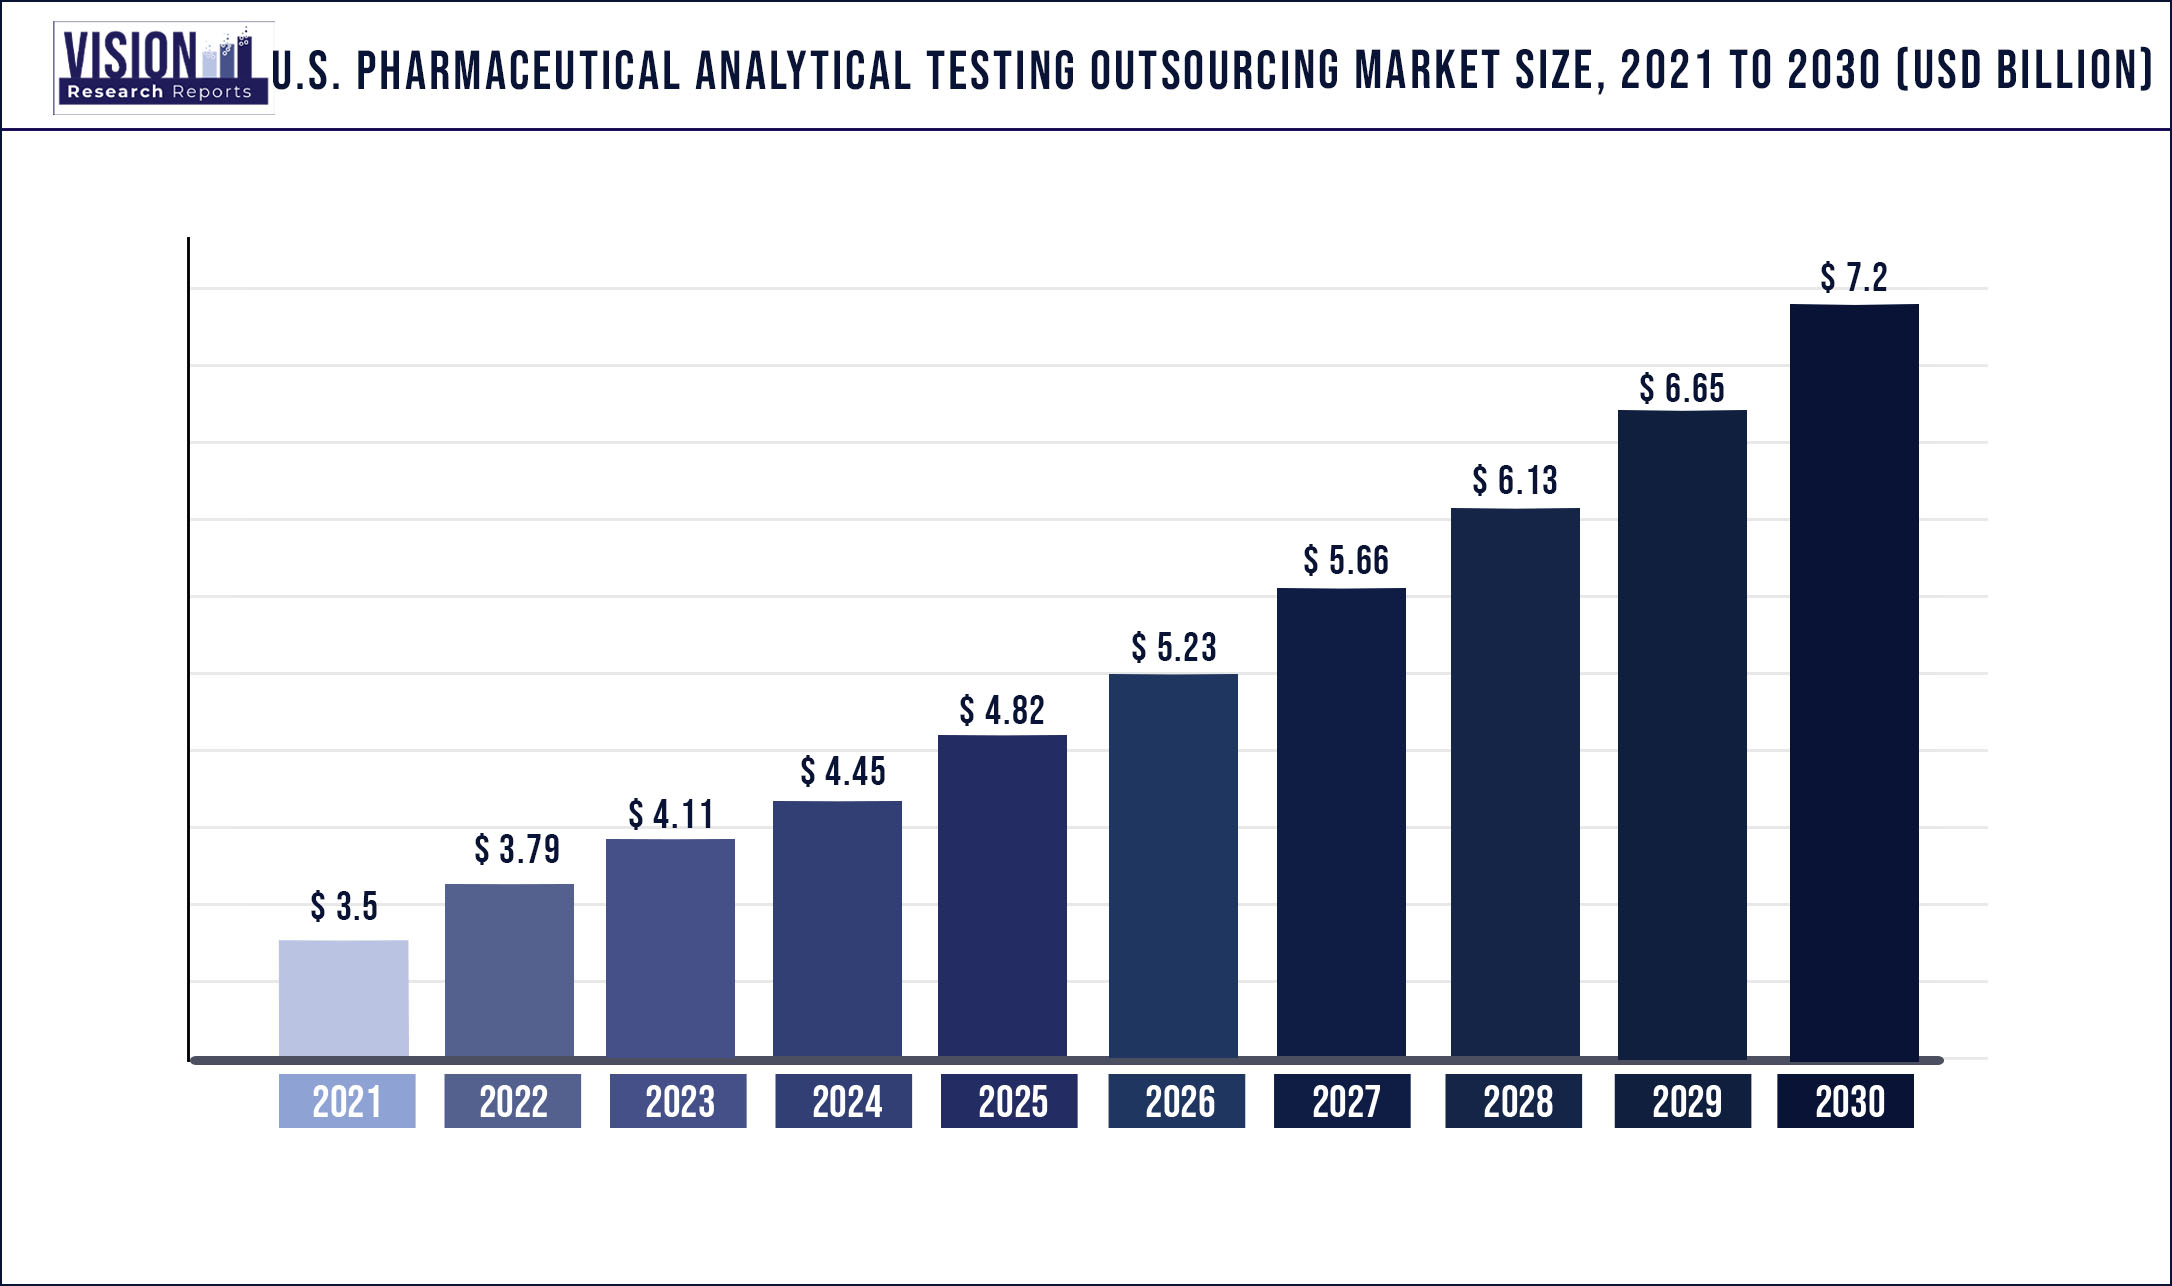 U.S. Pharmaceutical Analytical Testing Outsourcing Market Size 2021 to 2030